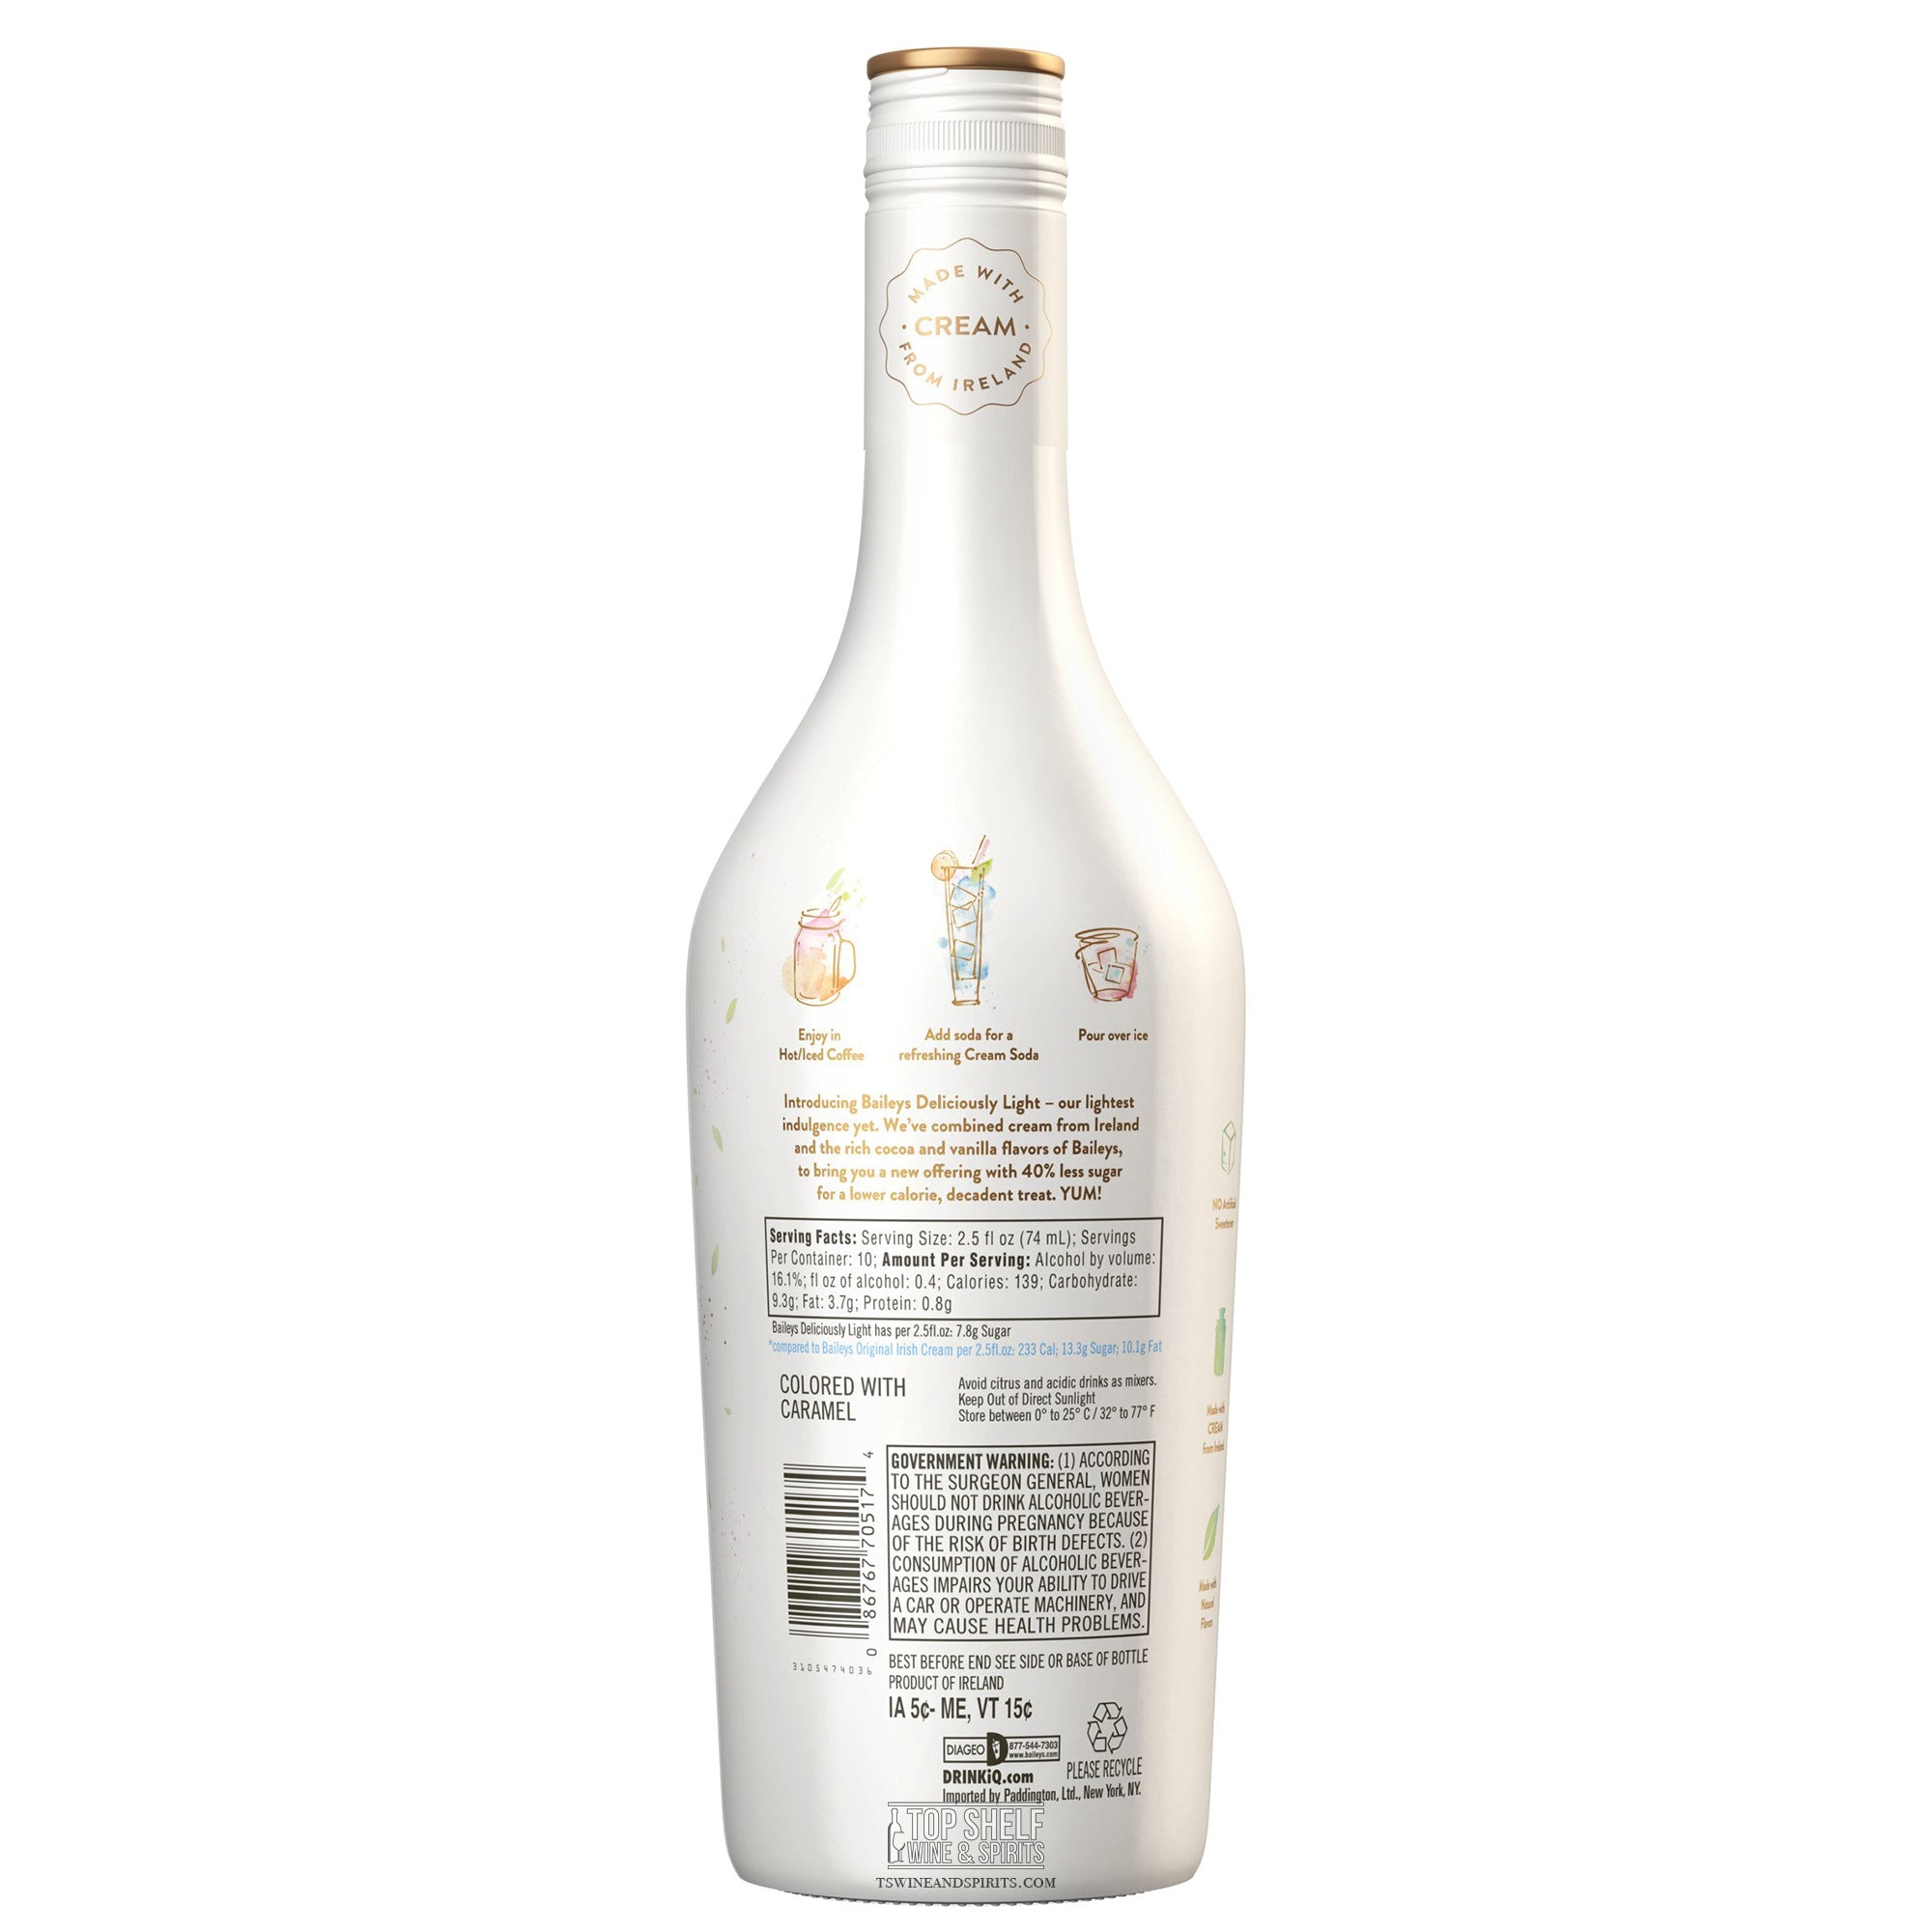 Baileys Deliciously Light 750mL – Crown Wine and Spirits